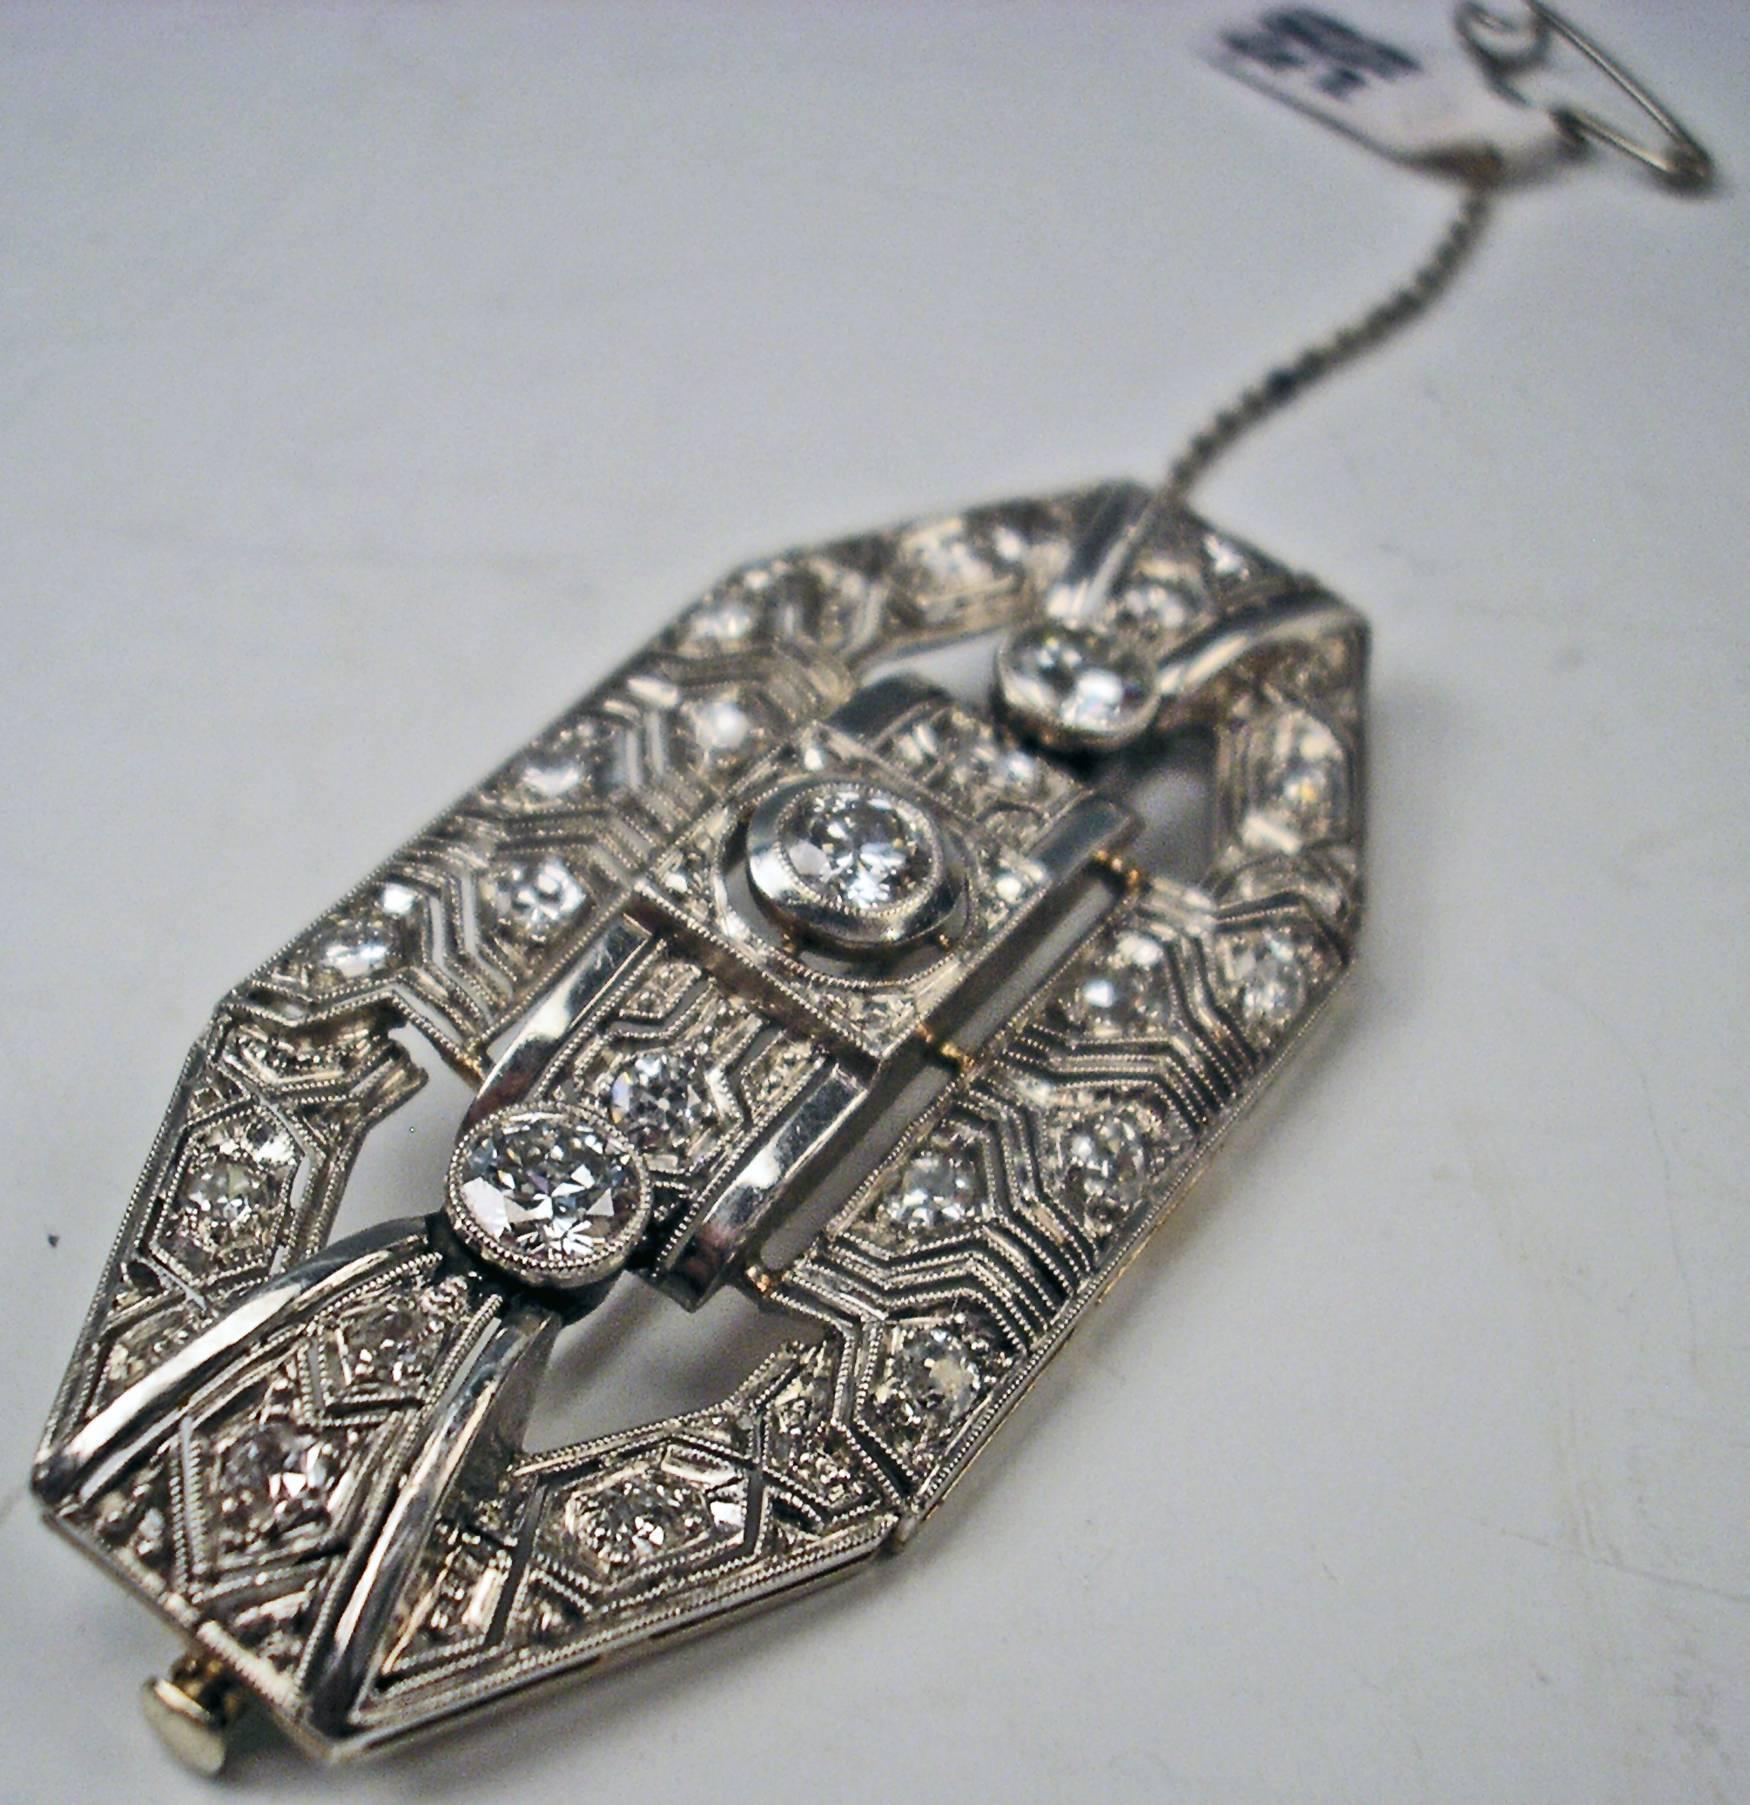 Finest Art Deco Platinum Brooch with many DIAMONDS - vintage cuts, having 2,10 carat in total. Most elegant octagonal - i.e. geometric -  as well as reticulated form type !

Closure of secure type existing.

made of PLATINUM  / 950 ct.
Vienna,